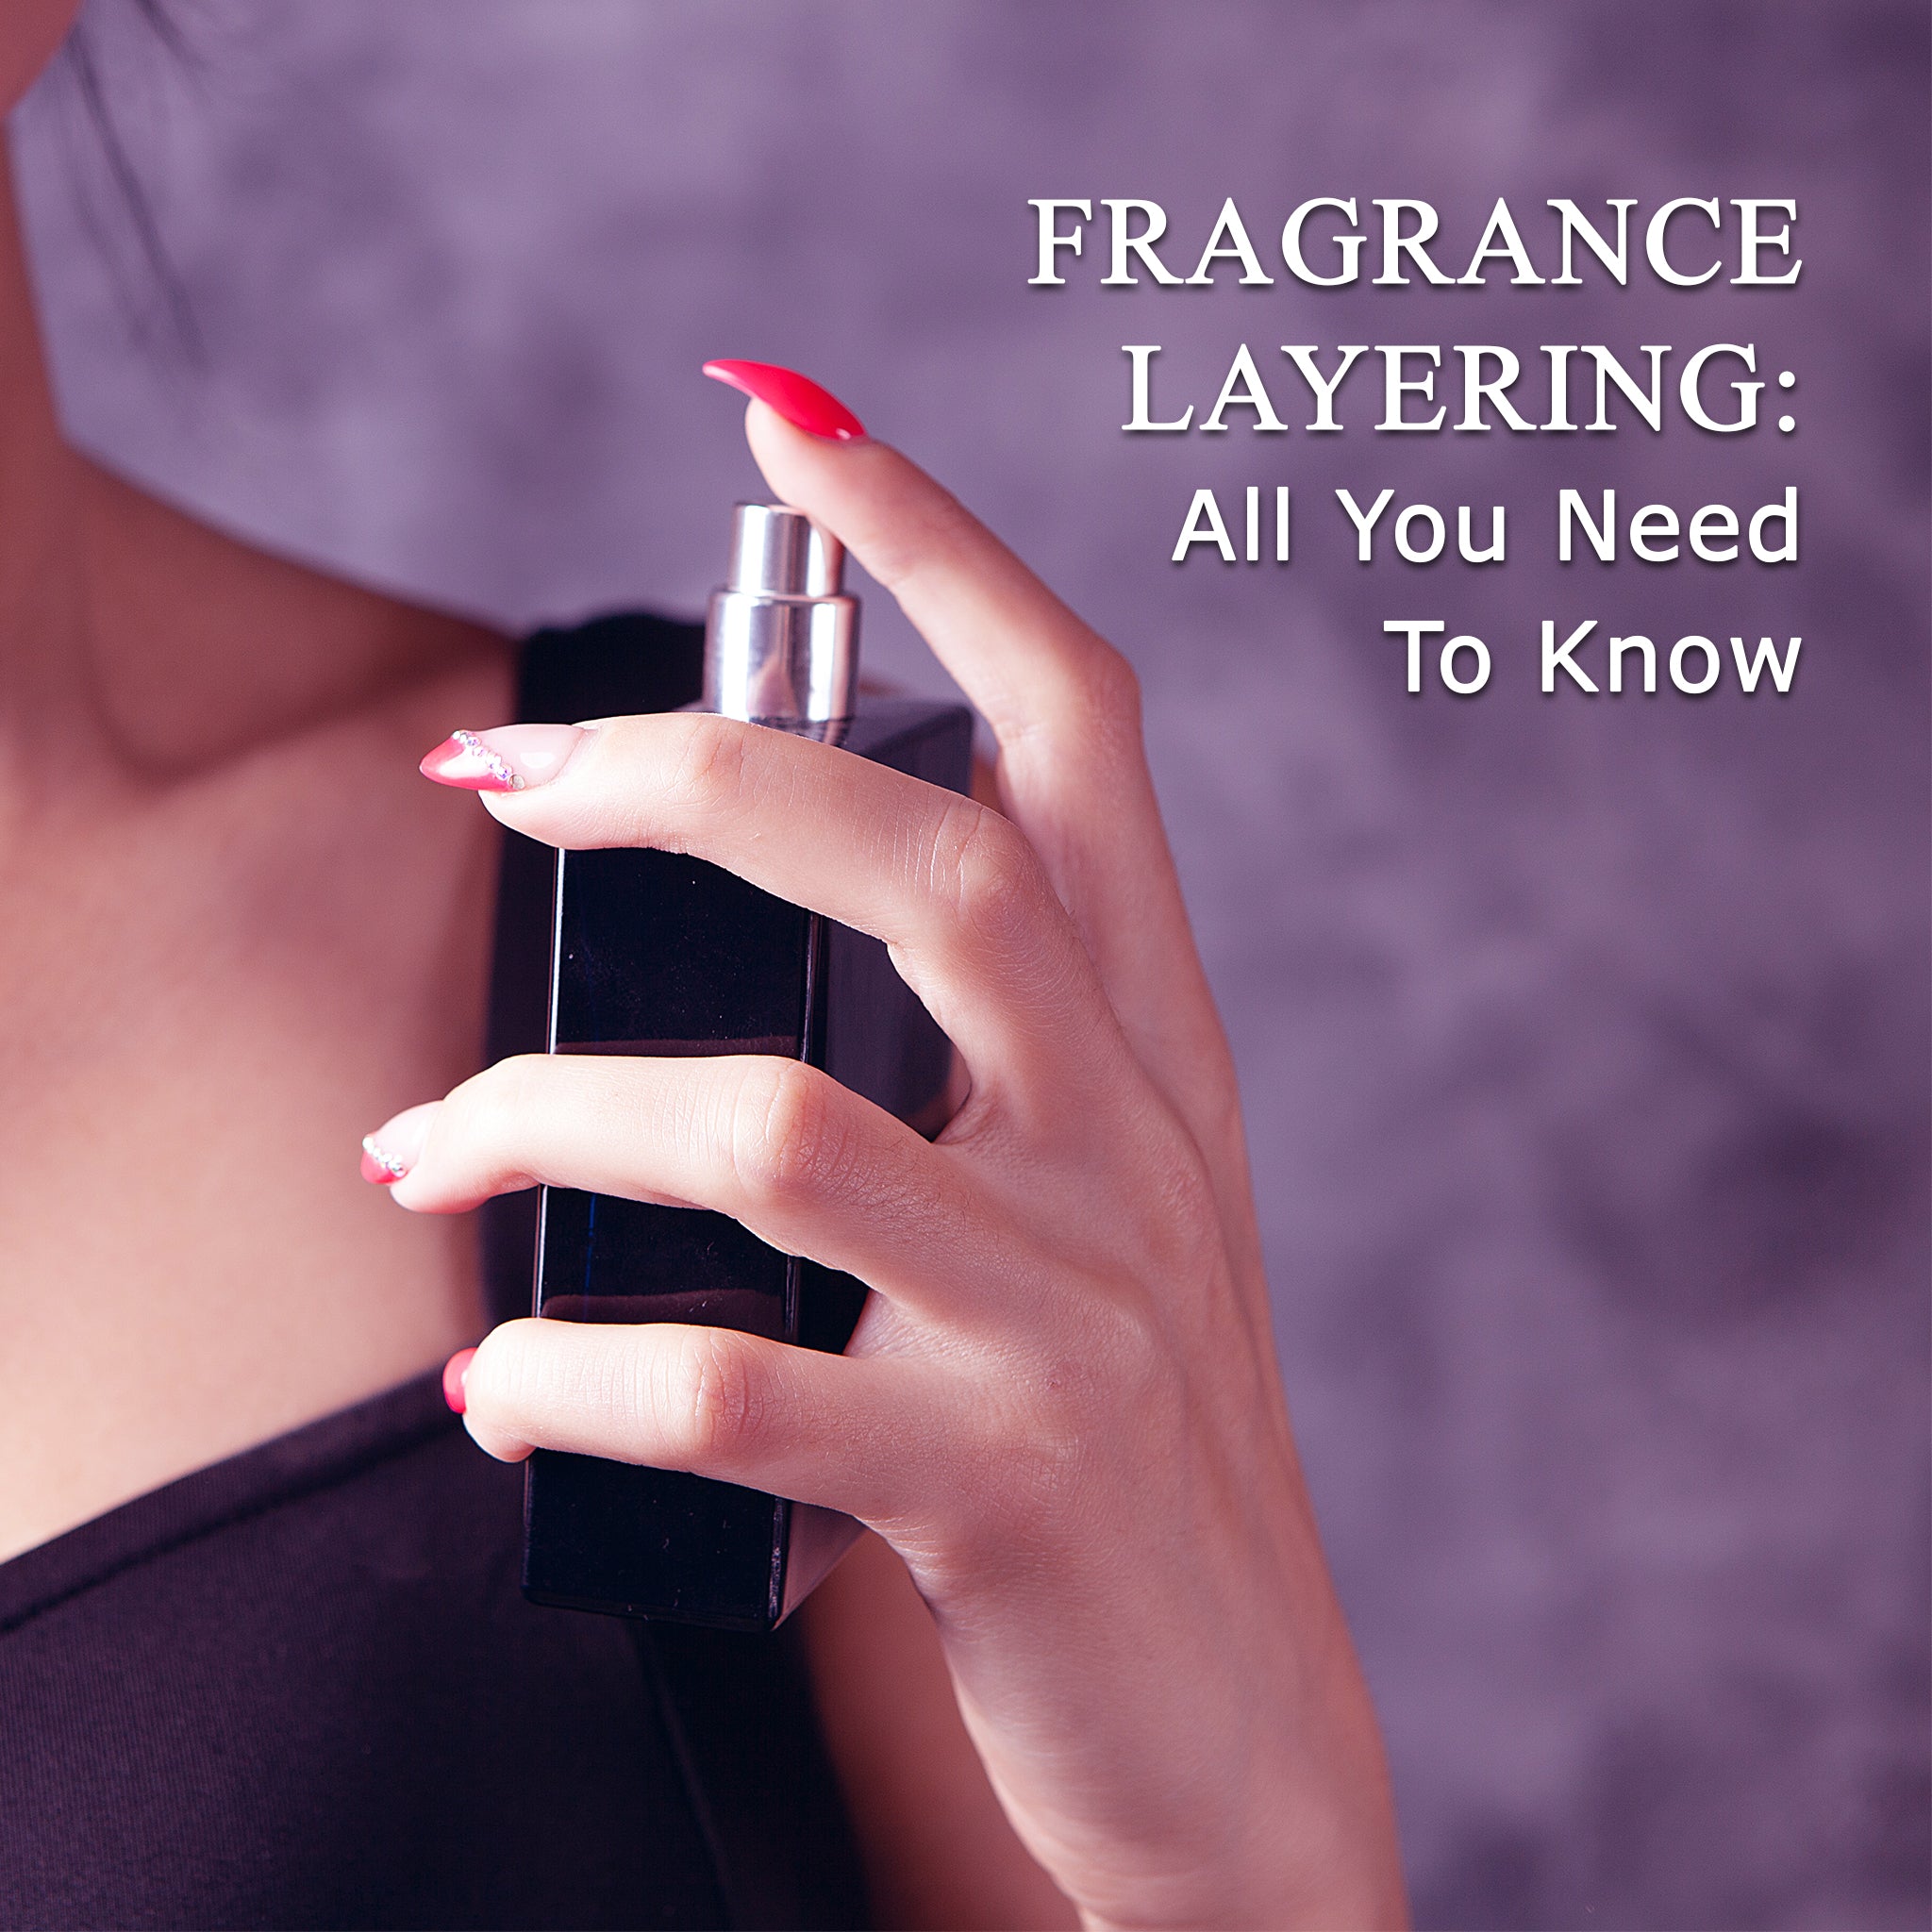 ALL YOU NEED TO KNOW ABOUT FRAGRANCE LAYERING